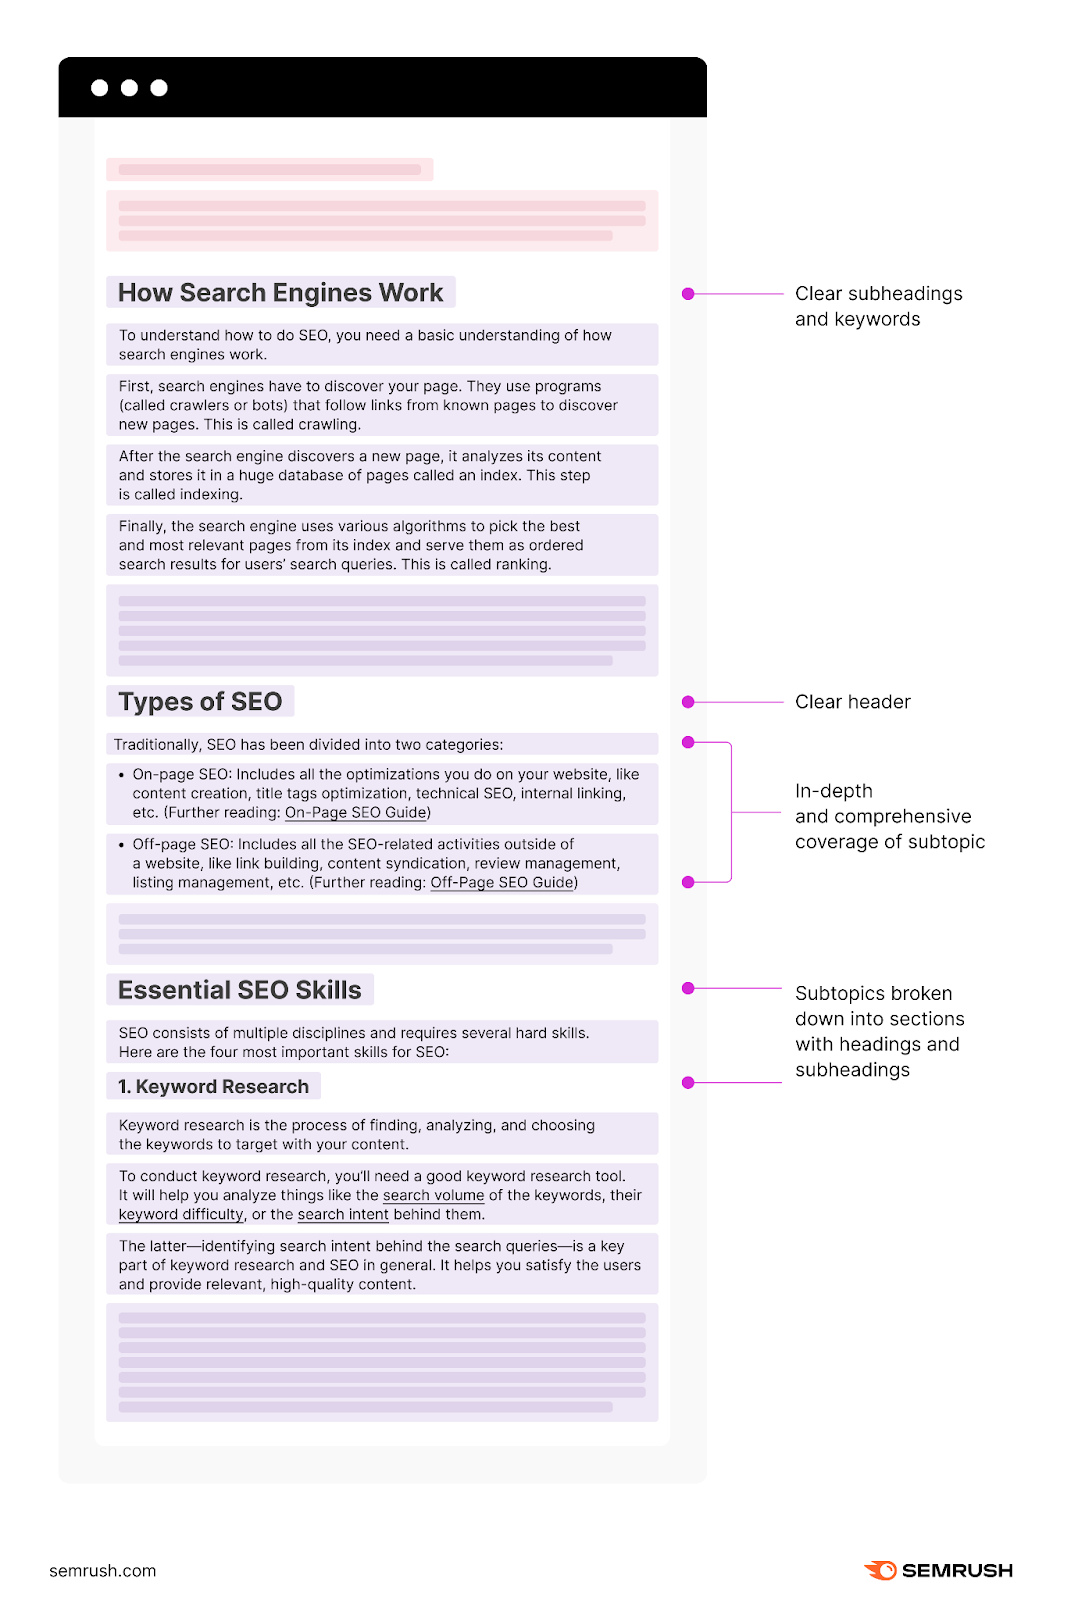 An infographic laying out "How Search Engines Work", "Types of SEO", and "Essential SEO skills" sections of the article